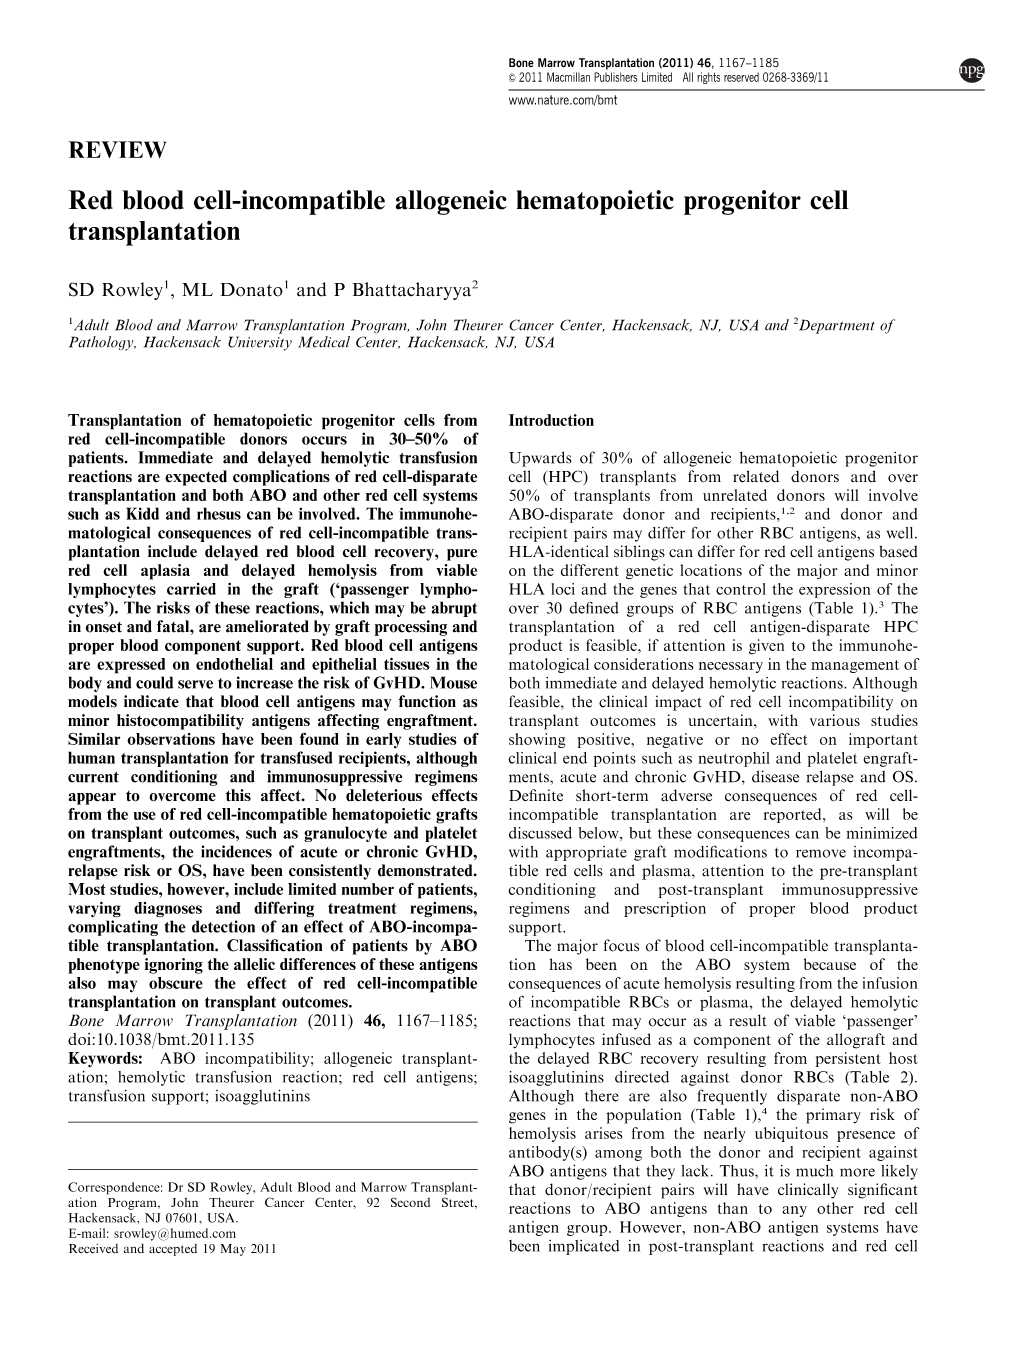 Red Blood Cell-Incompatible Allogeneic Hematopoietic Progenitor Cell Transplantation